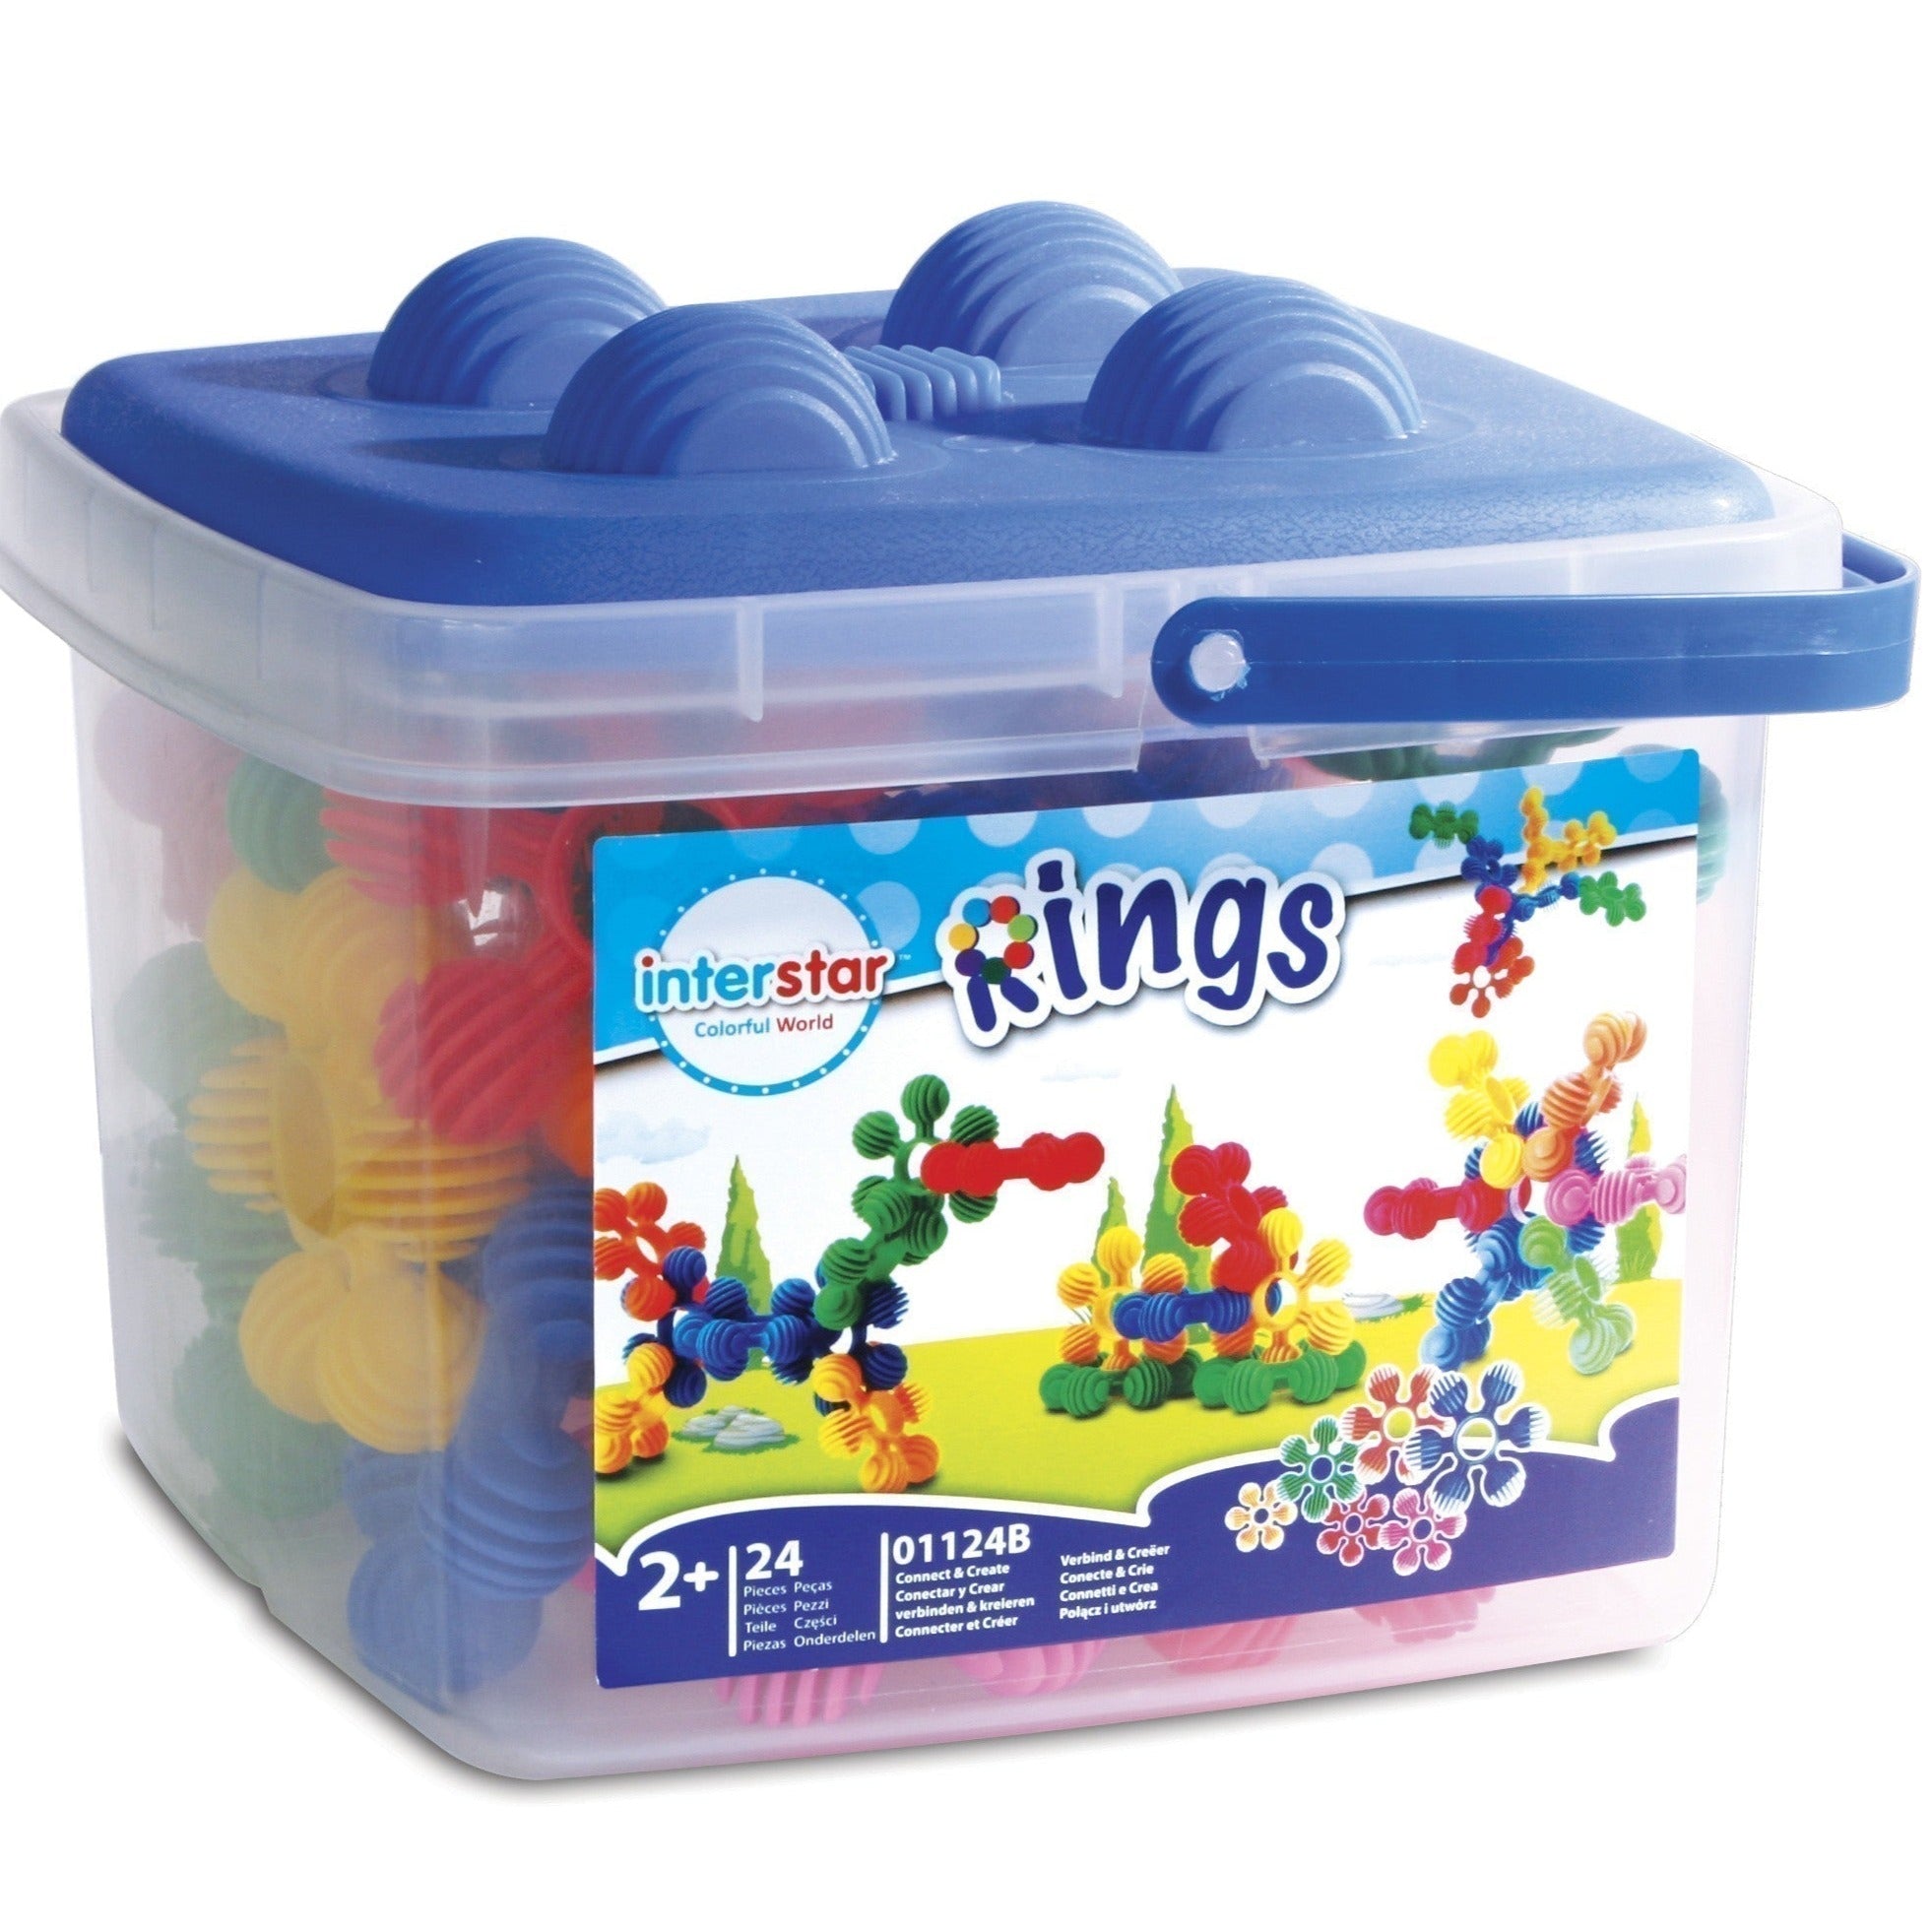 Interstar Rings 24 Pieces, Let imaginations run wild with this Interstar Rings set! These ingenious, vibrantly coloured linking rings are tactile and easy for little hands to hold and connect.With endless building possibilities, this versatile sensory construction toy provides toddlers with lots of educational fun!Each Interstar Set can be integrated with others in the range to widen the building potential and each set contains a colourful ideas leaflet to get started with! Interstar Rings 24 Pieces 24 piec